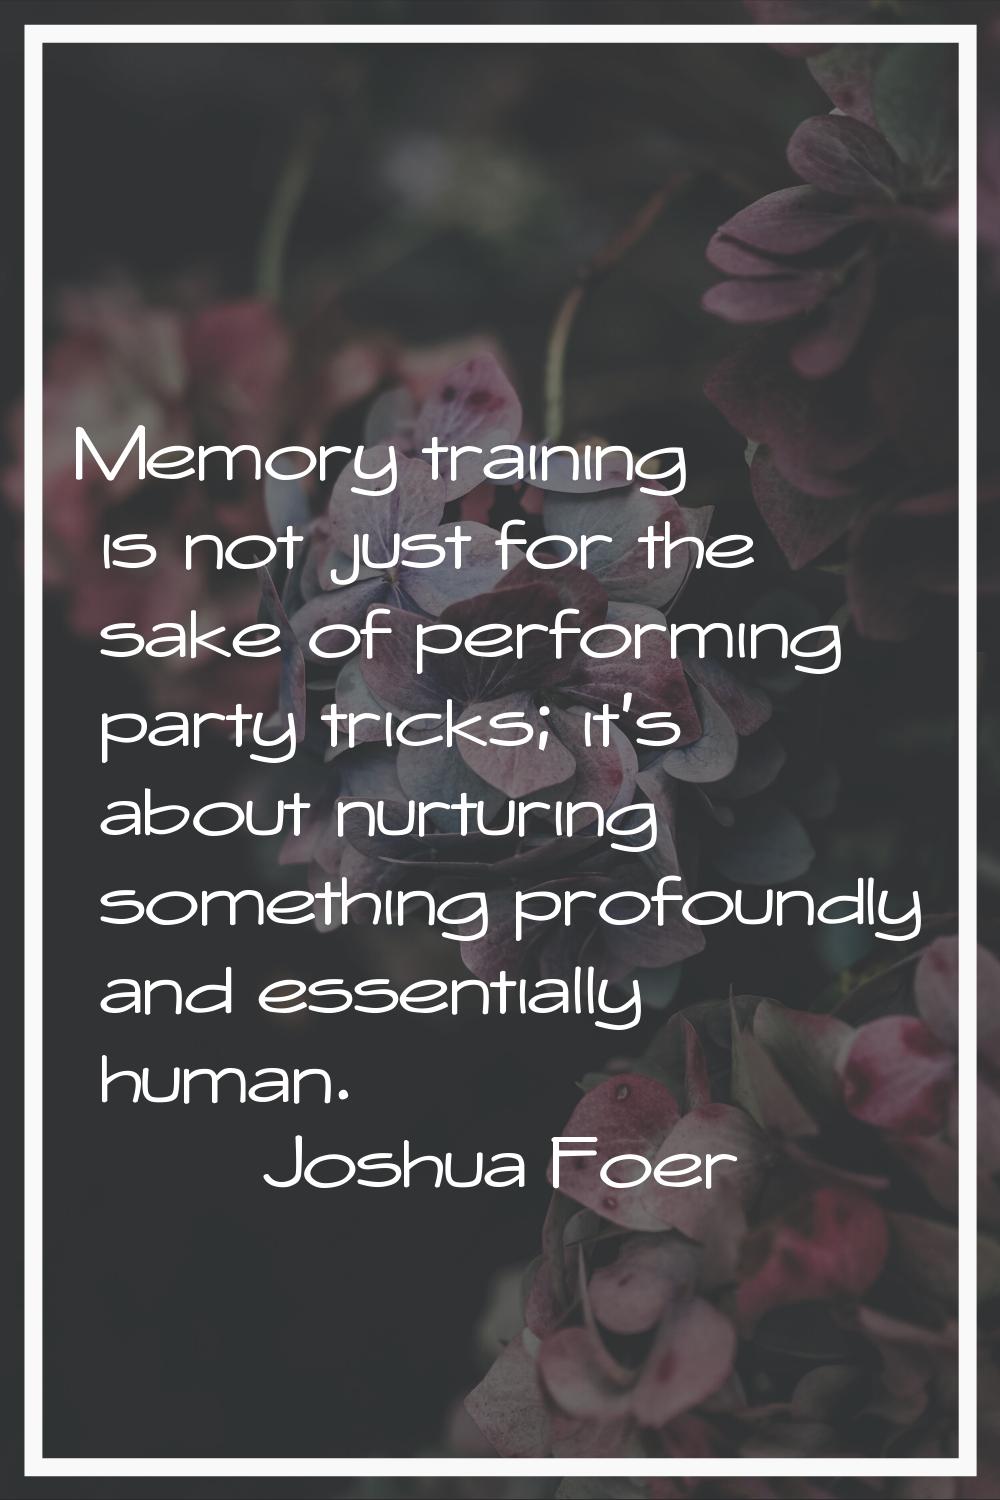 Memory training is not just for the sake of performing party tricks; it's about nurturing something